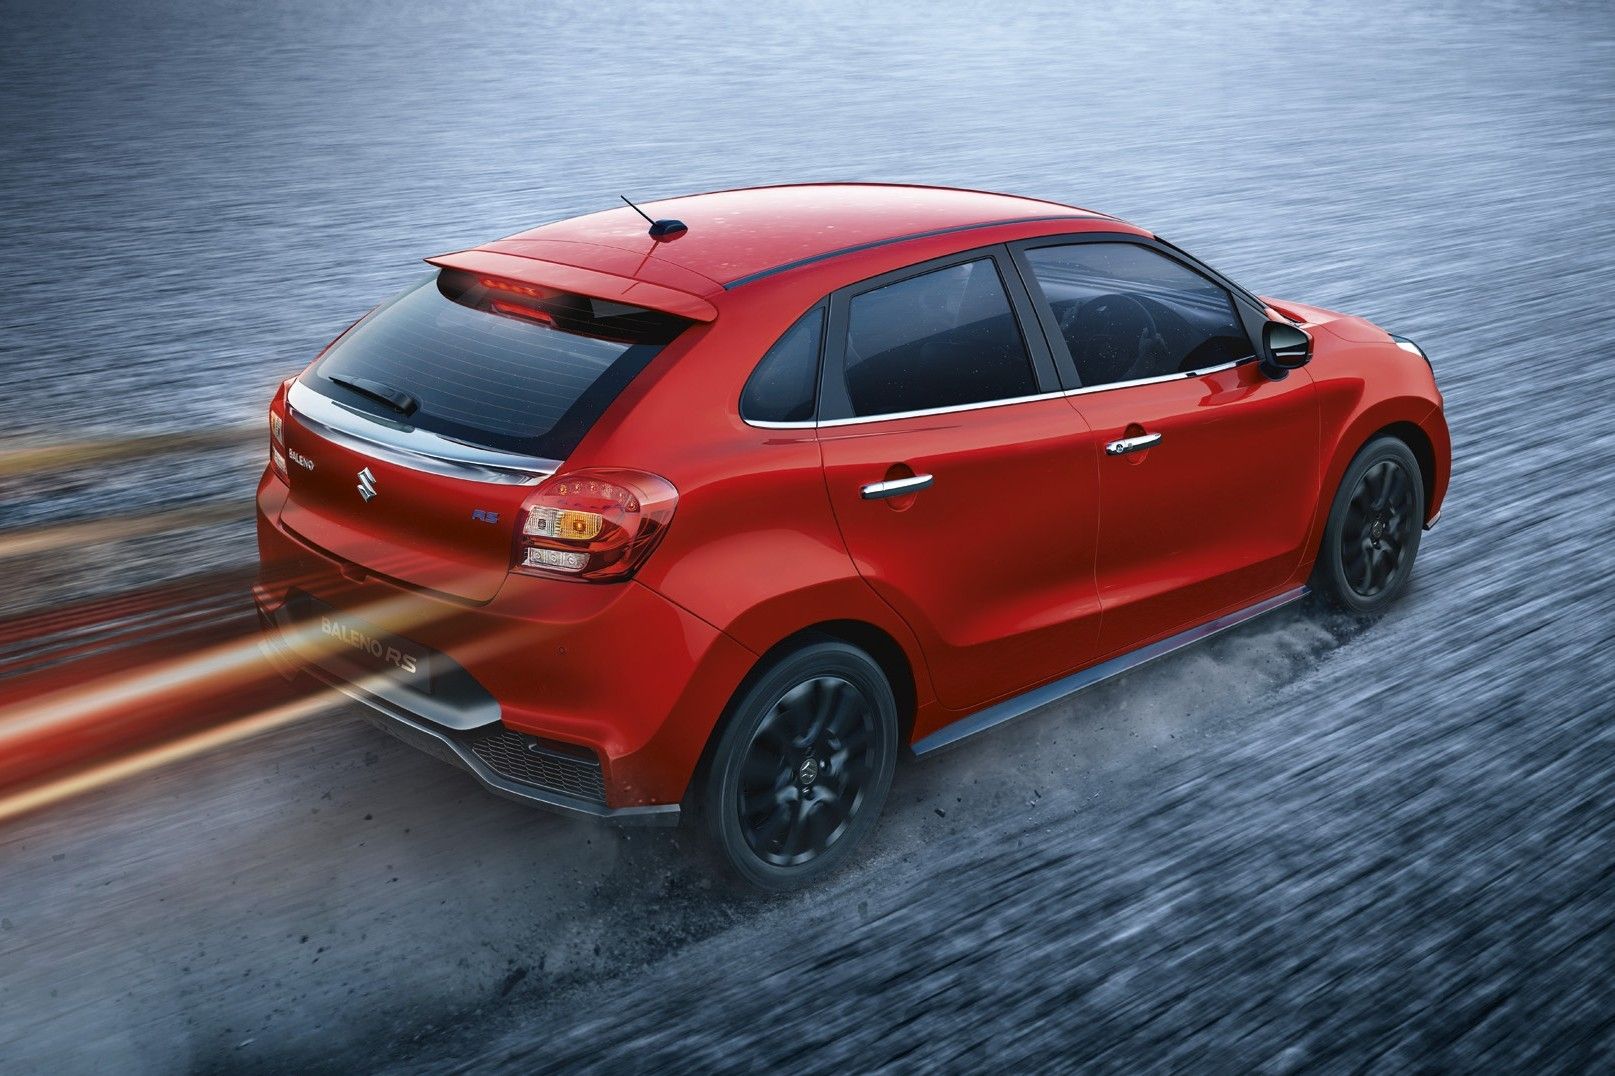 2019 Maruti Baleno RS Facelift To Get New Bumper, Alloy Wheels & More Updates